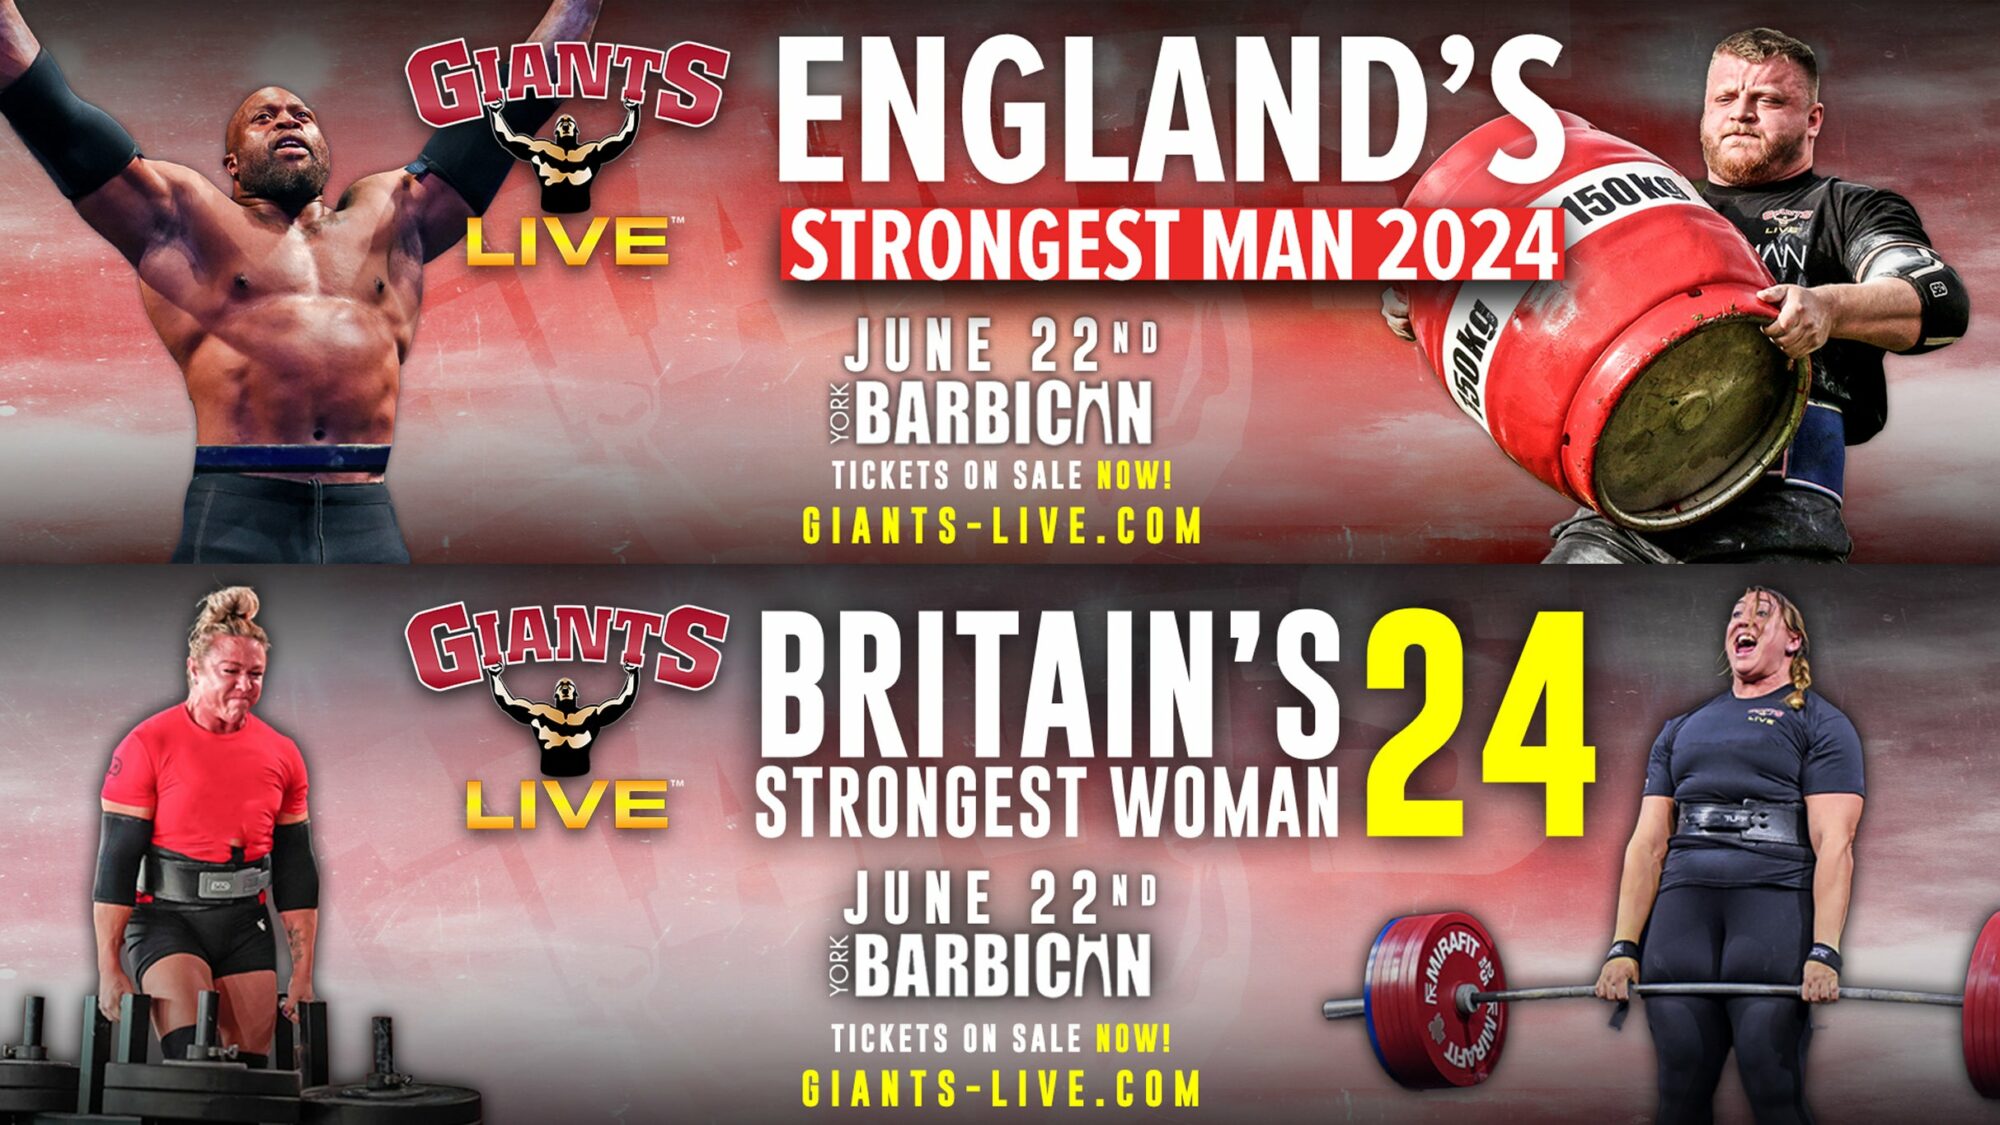 Image name Englands Strongest Man Britains Strongest Woman All Day Ticket at York Barbican York the 2 image from the post England's Strongest Man & Britain's Strongest Woman - All Day Ticket at York Barbican, York in Yorkshire.com.